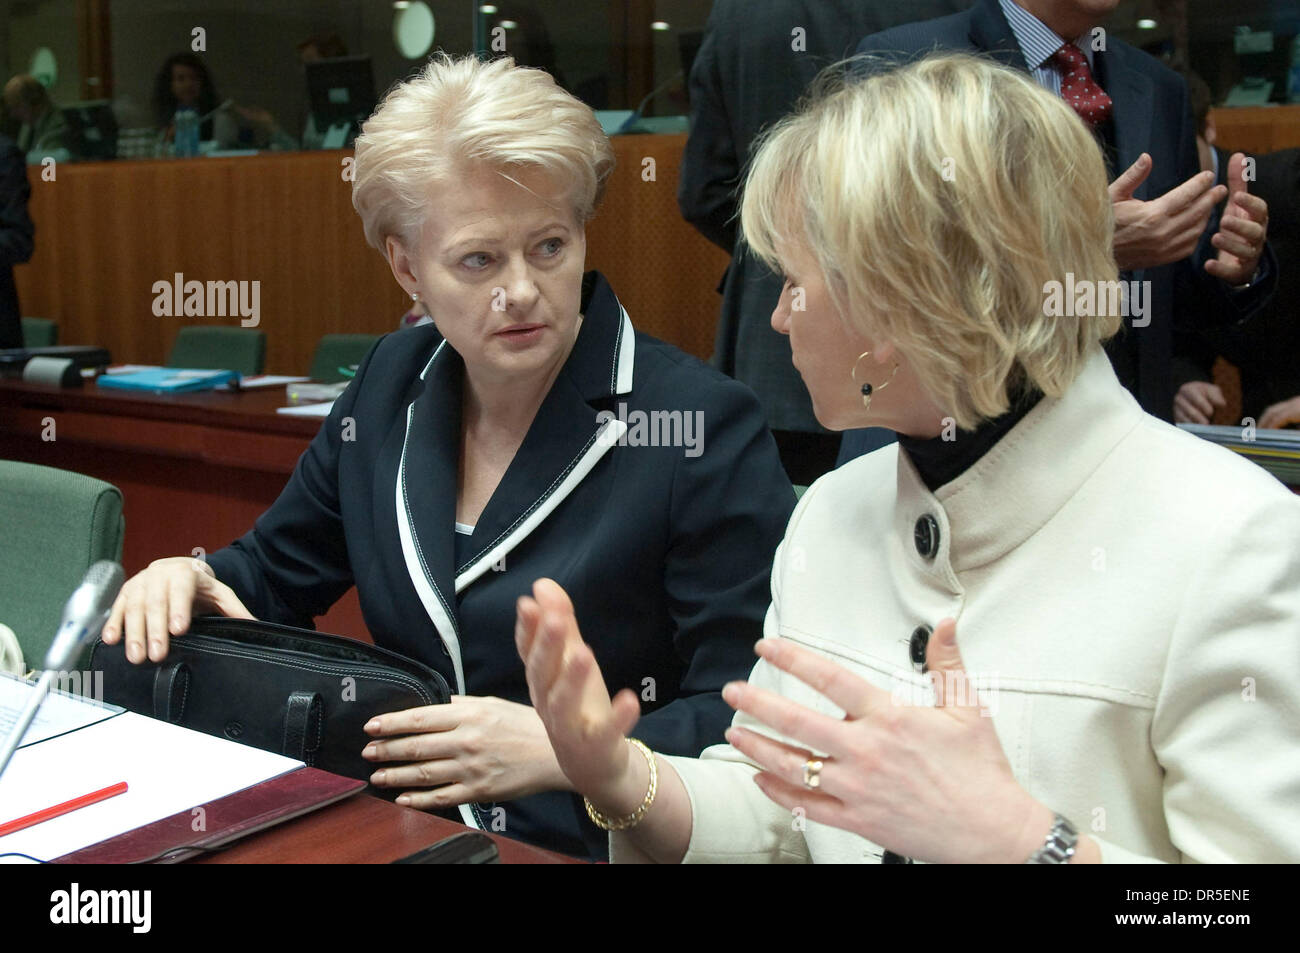 Mar 16, 2009 - Brussels, Belgium - EU Commissioner for financial programming and budget, Lithuanian, DALIA GRYBAUSKAITE (L) chats with MARGOT WALLSTROM prior to a General Affairs and External Relations (GAERC) Council at European Union (EU) headquarters. (Credit Image: © Wiktor Dabkowski/ZUMA Press) Stock Photo